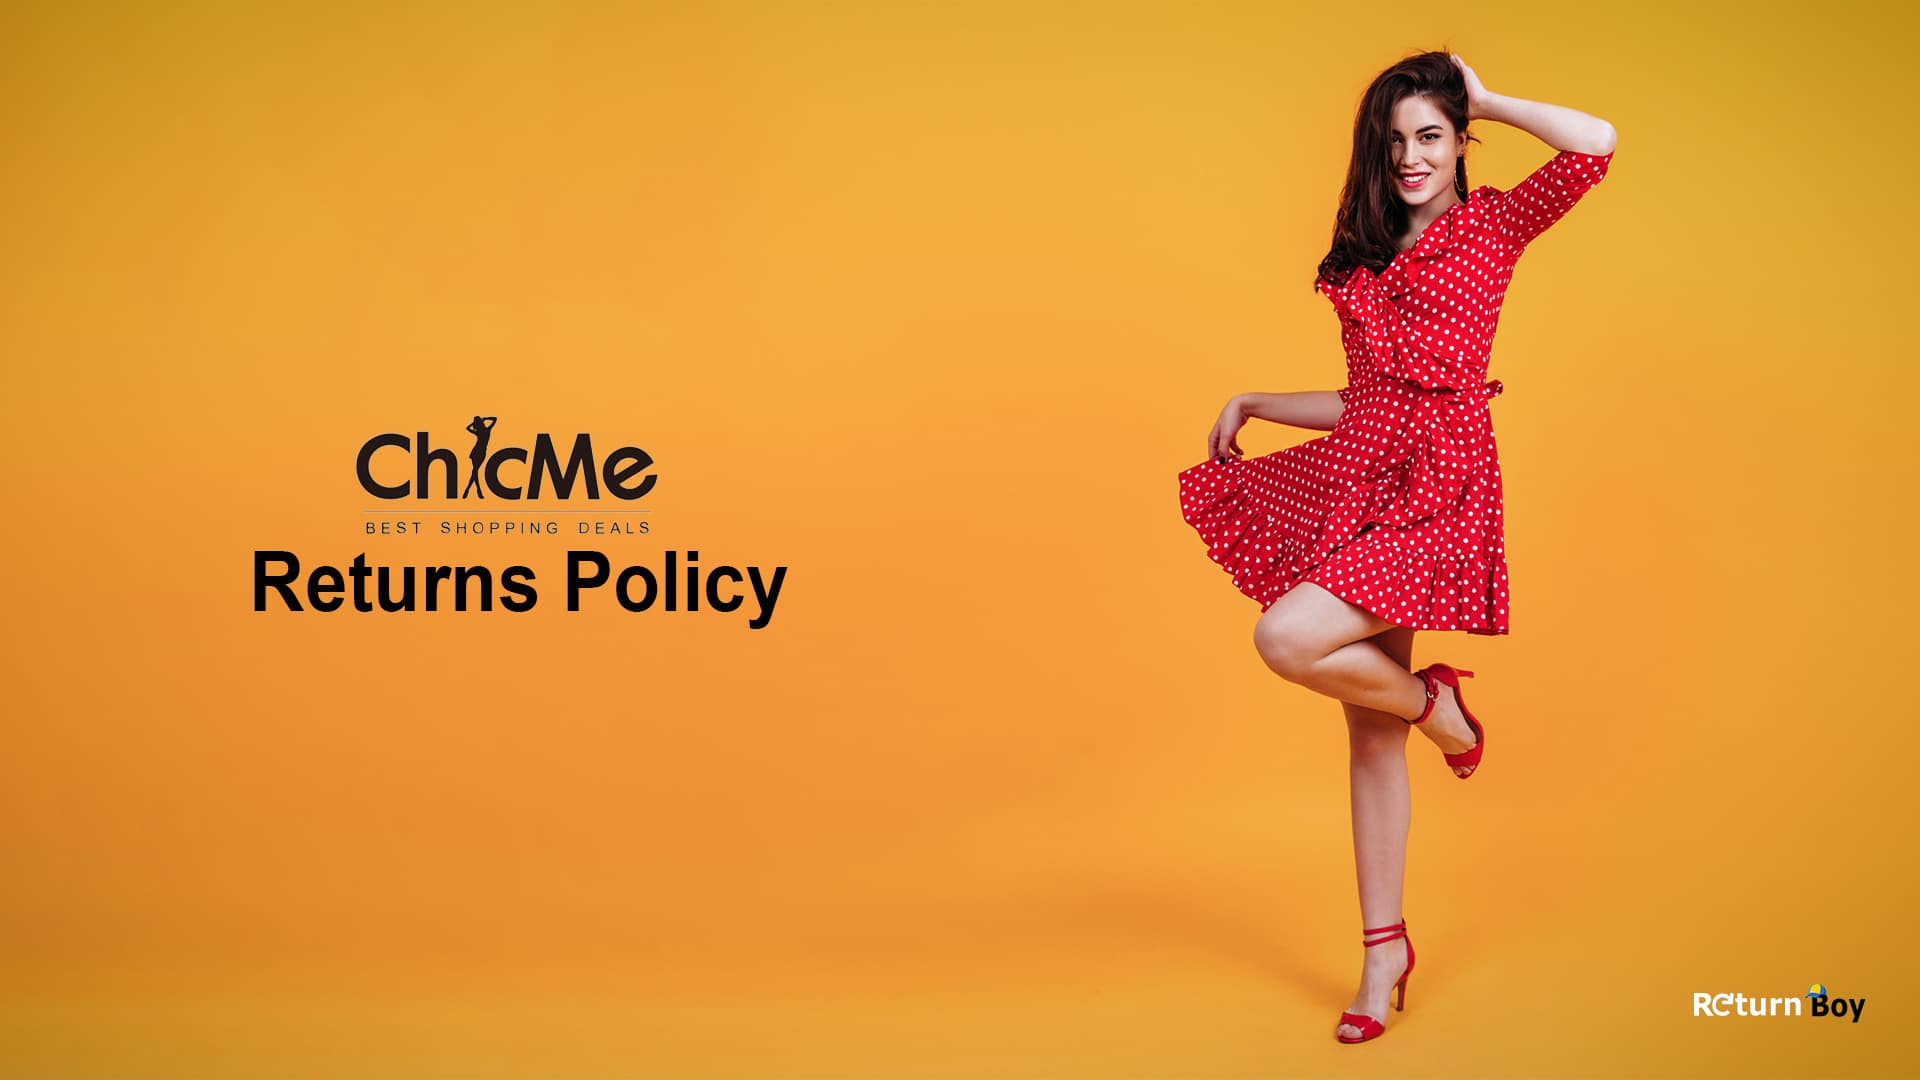 ChicMe Returns Policy